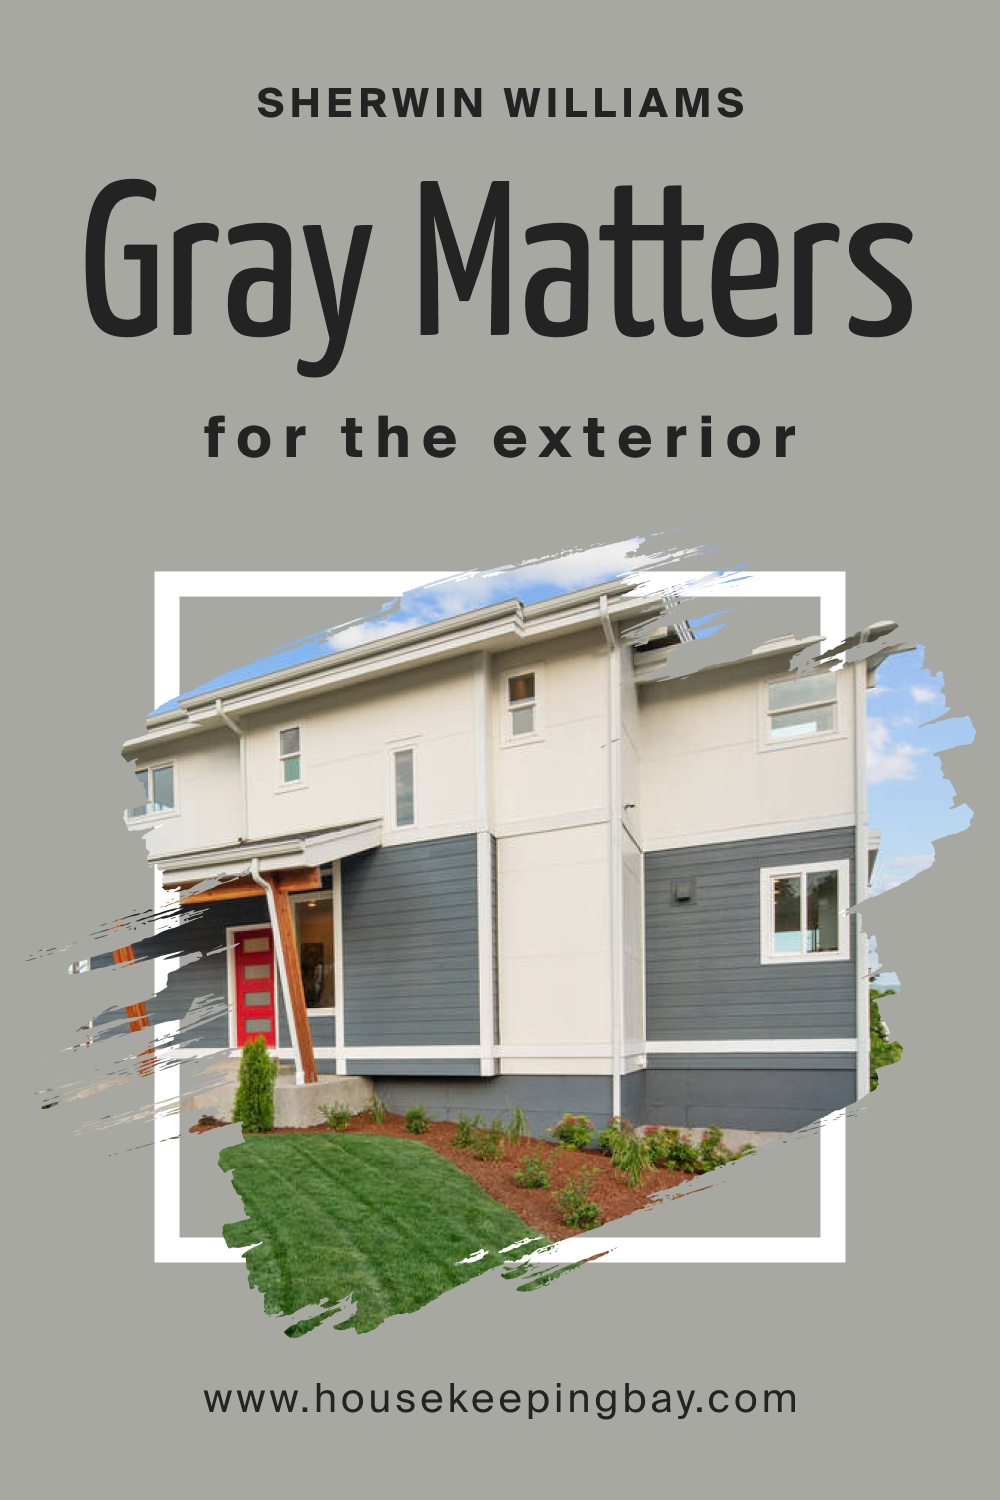 Sherwin Williams. Gray Matters SW 7066 For the exterior